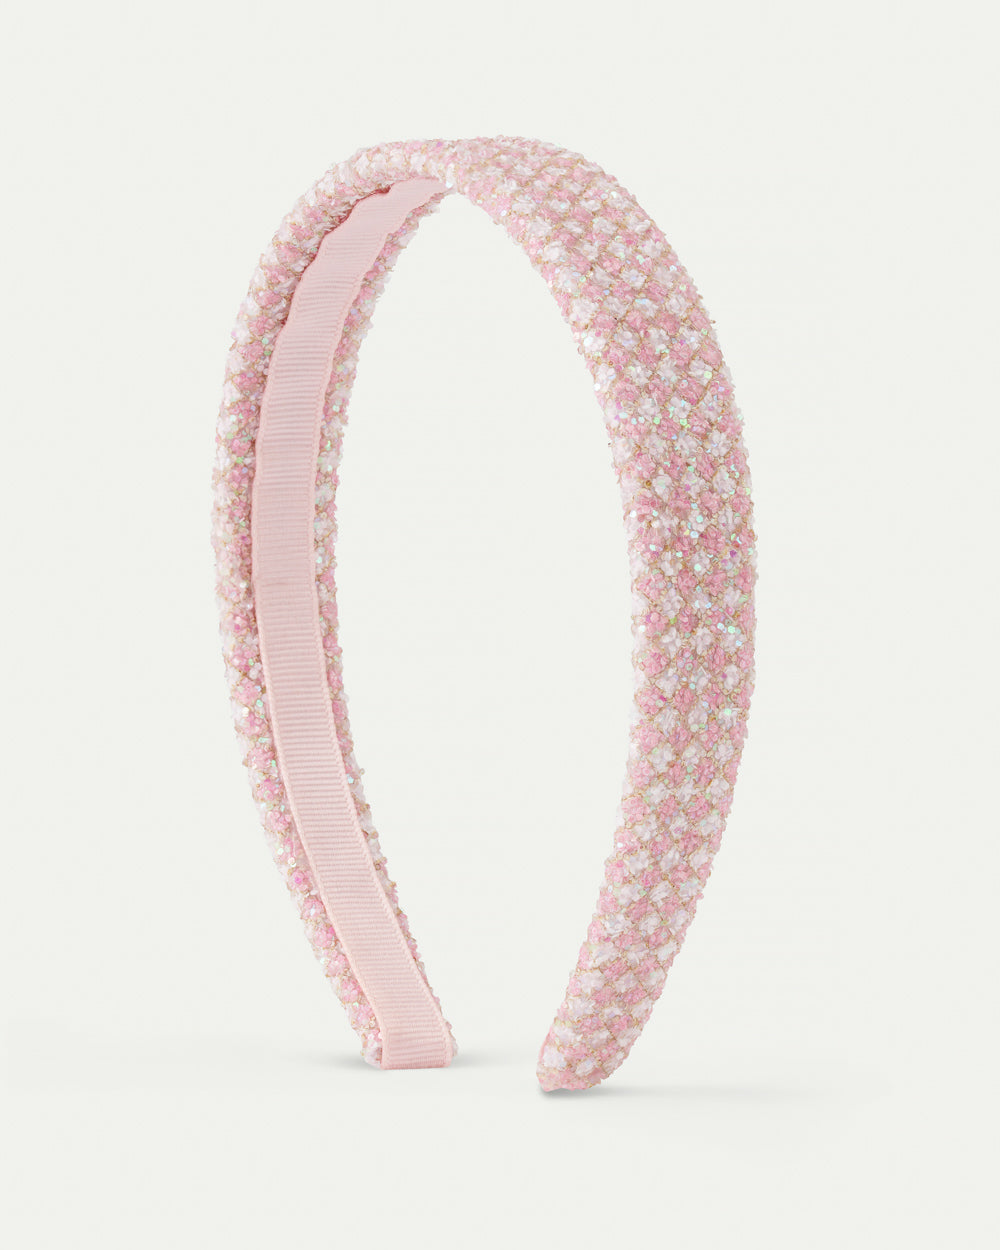 Pink sparkle glitter checkerboard headband using recycled materials